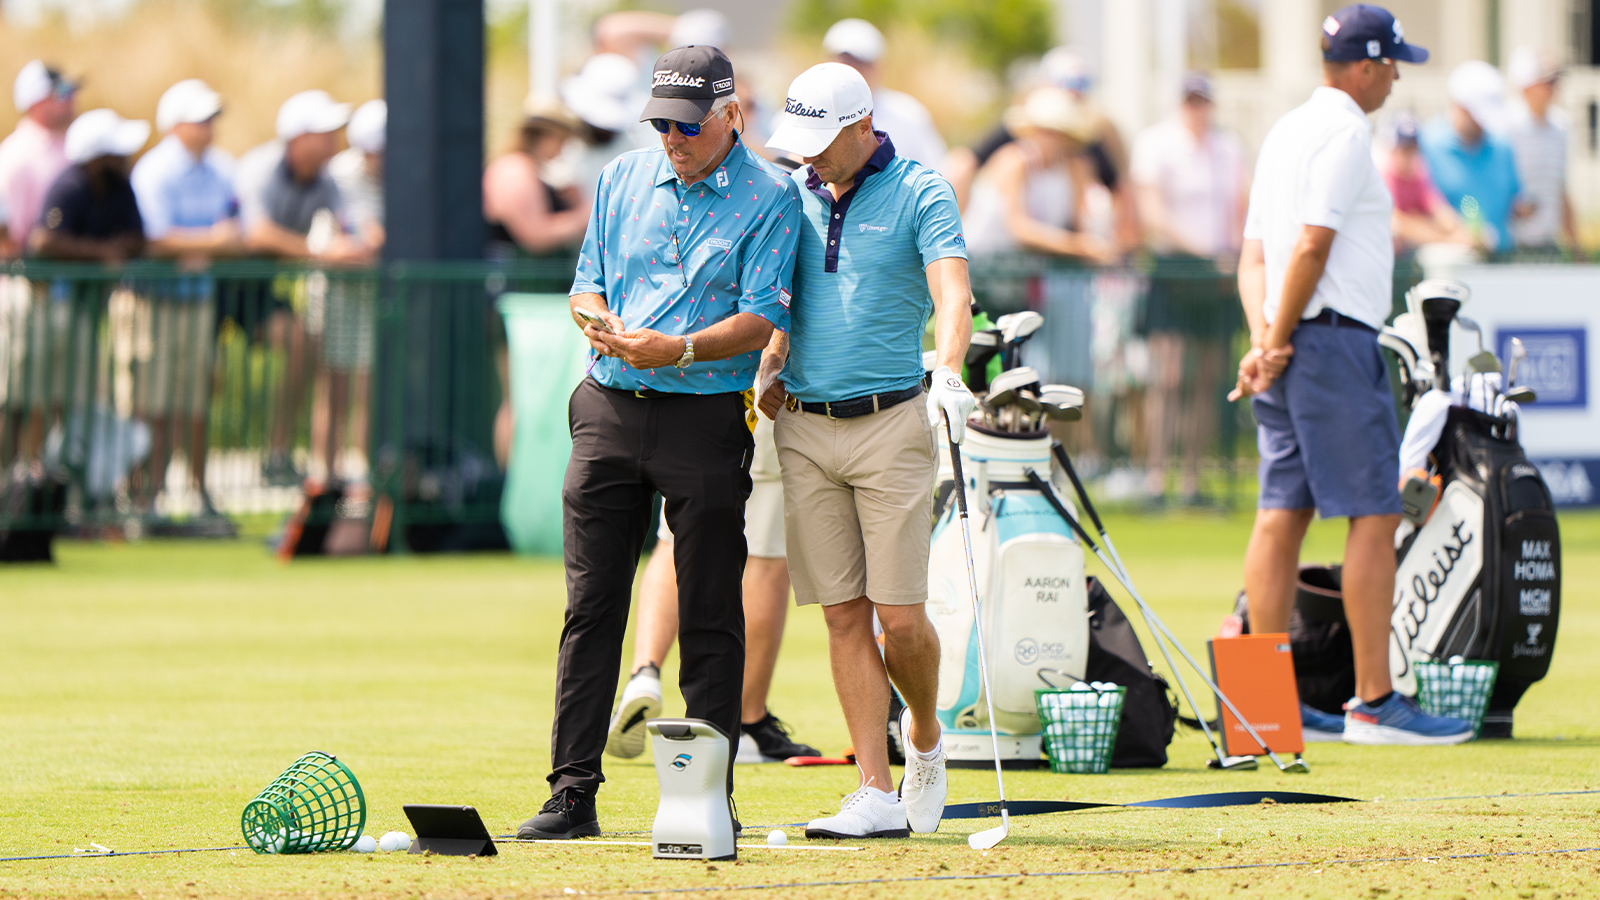 Justin Thomas and his father, Mike Thomas, PGA, on the driving range during a practice round for the 2021 PGA Championship held at the Ocean Course on May 17, 2021 in Kiawah Island, South Carolina. (Photo by Darren Carroll/PGA of America)